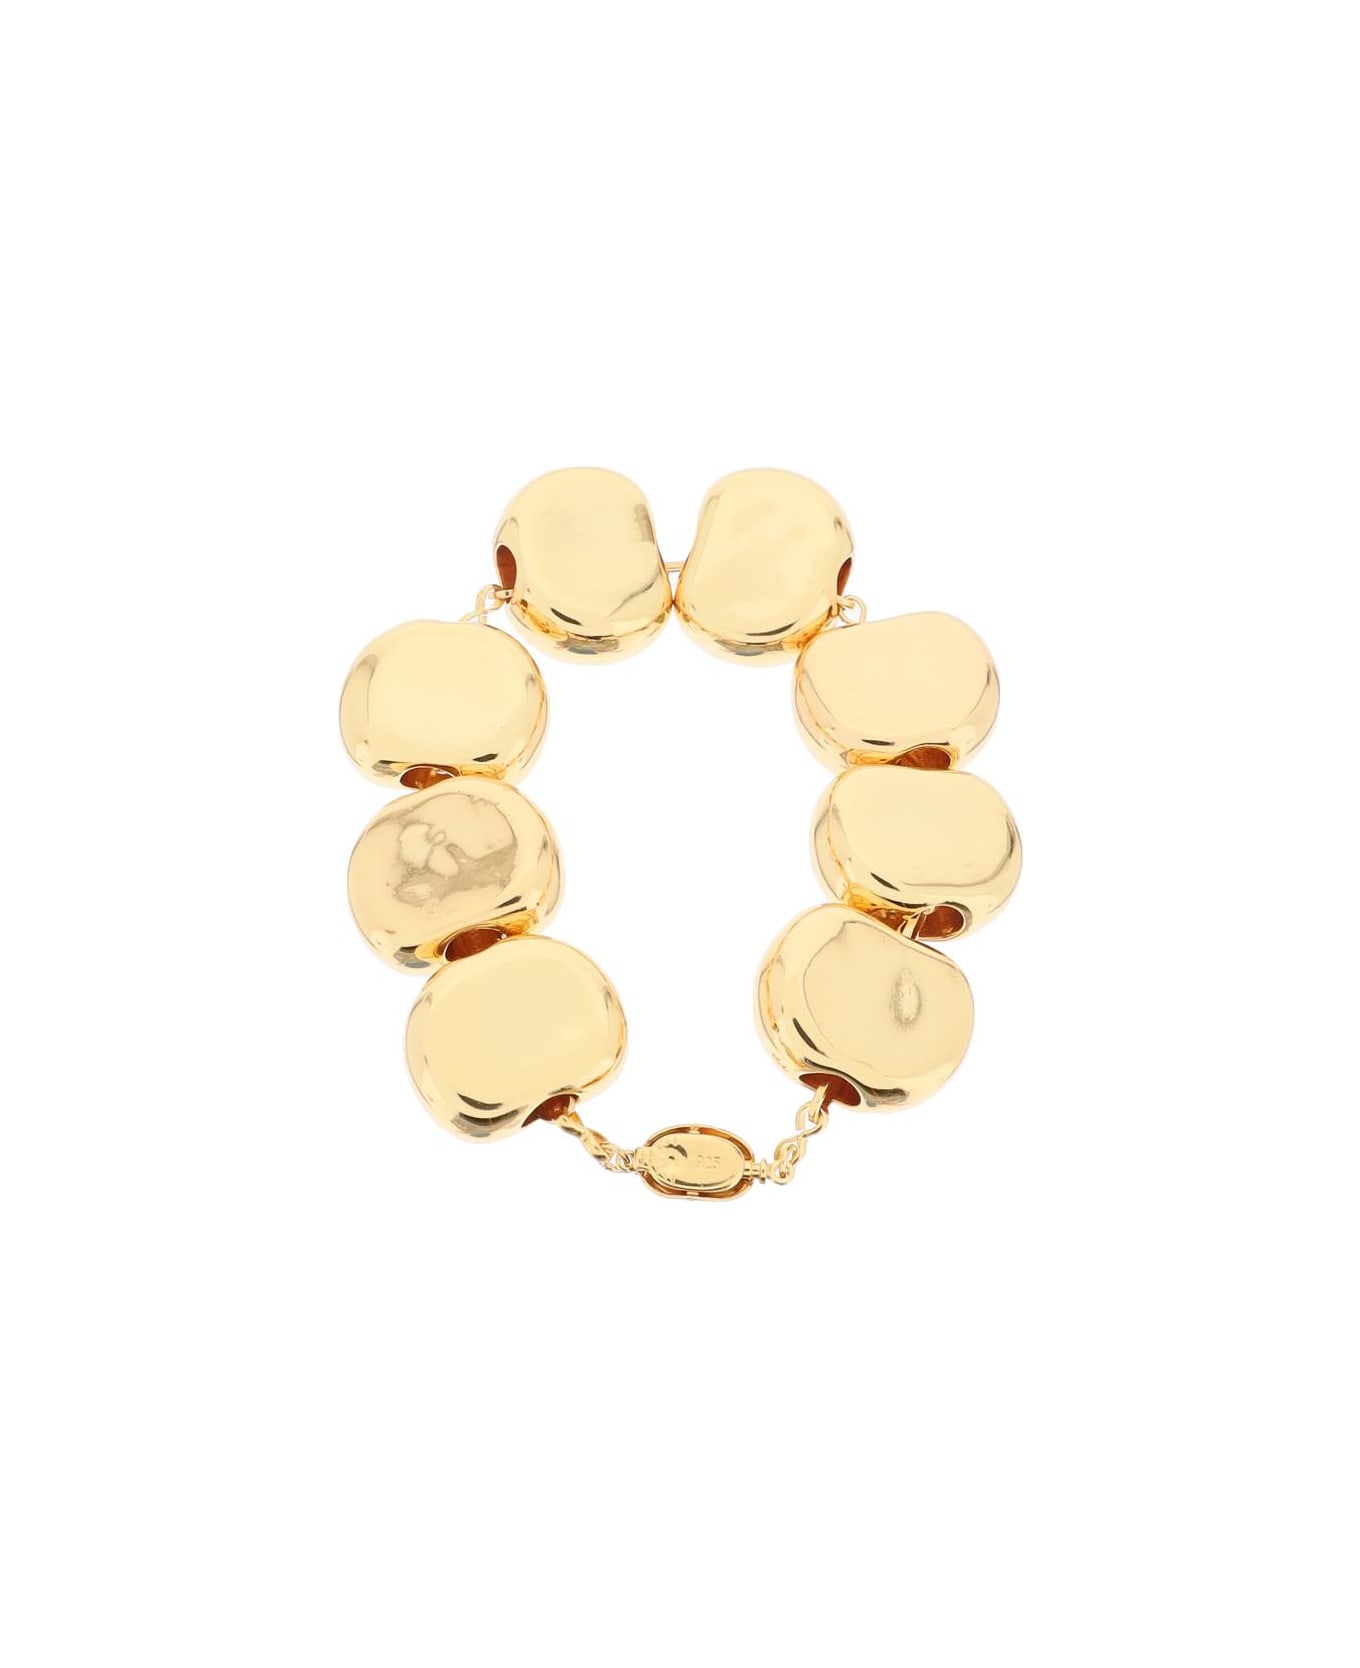 Timeless Pearly Bracelet With Eyes - GOLD (Gold)